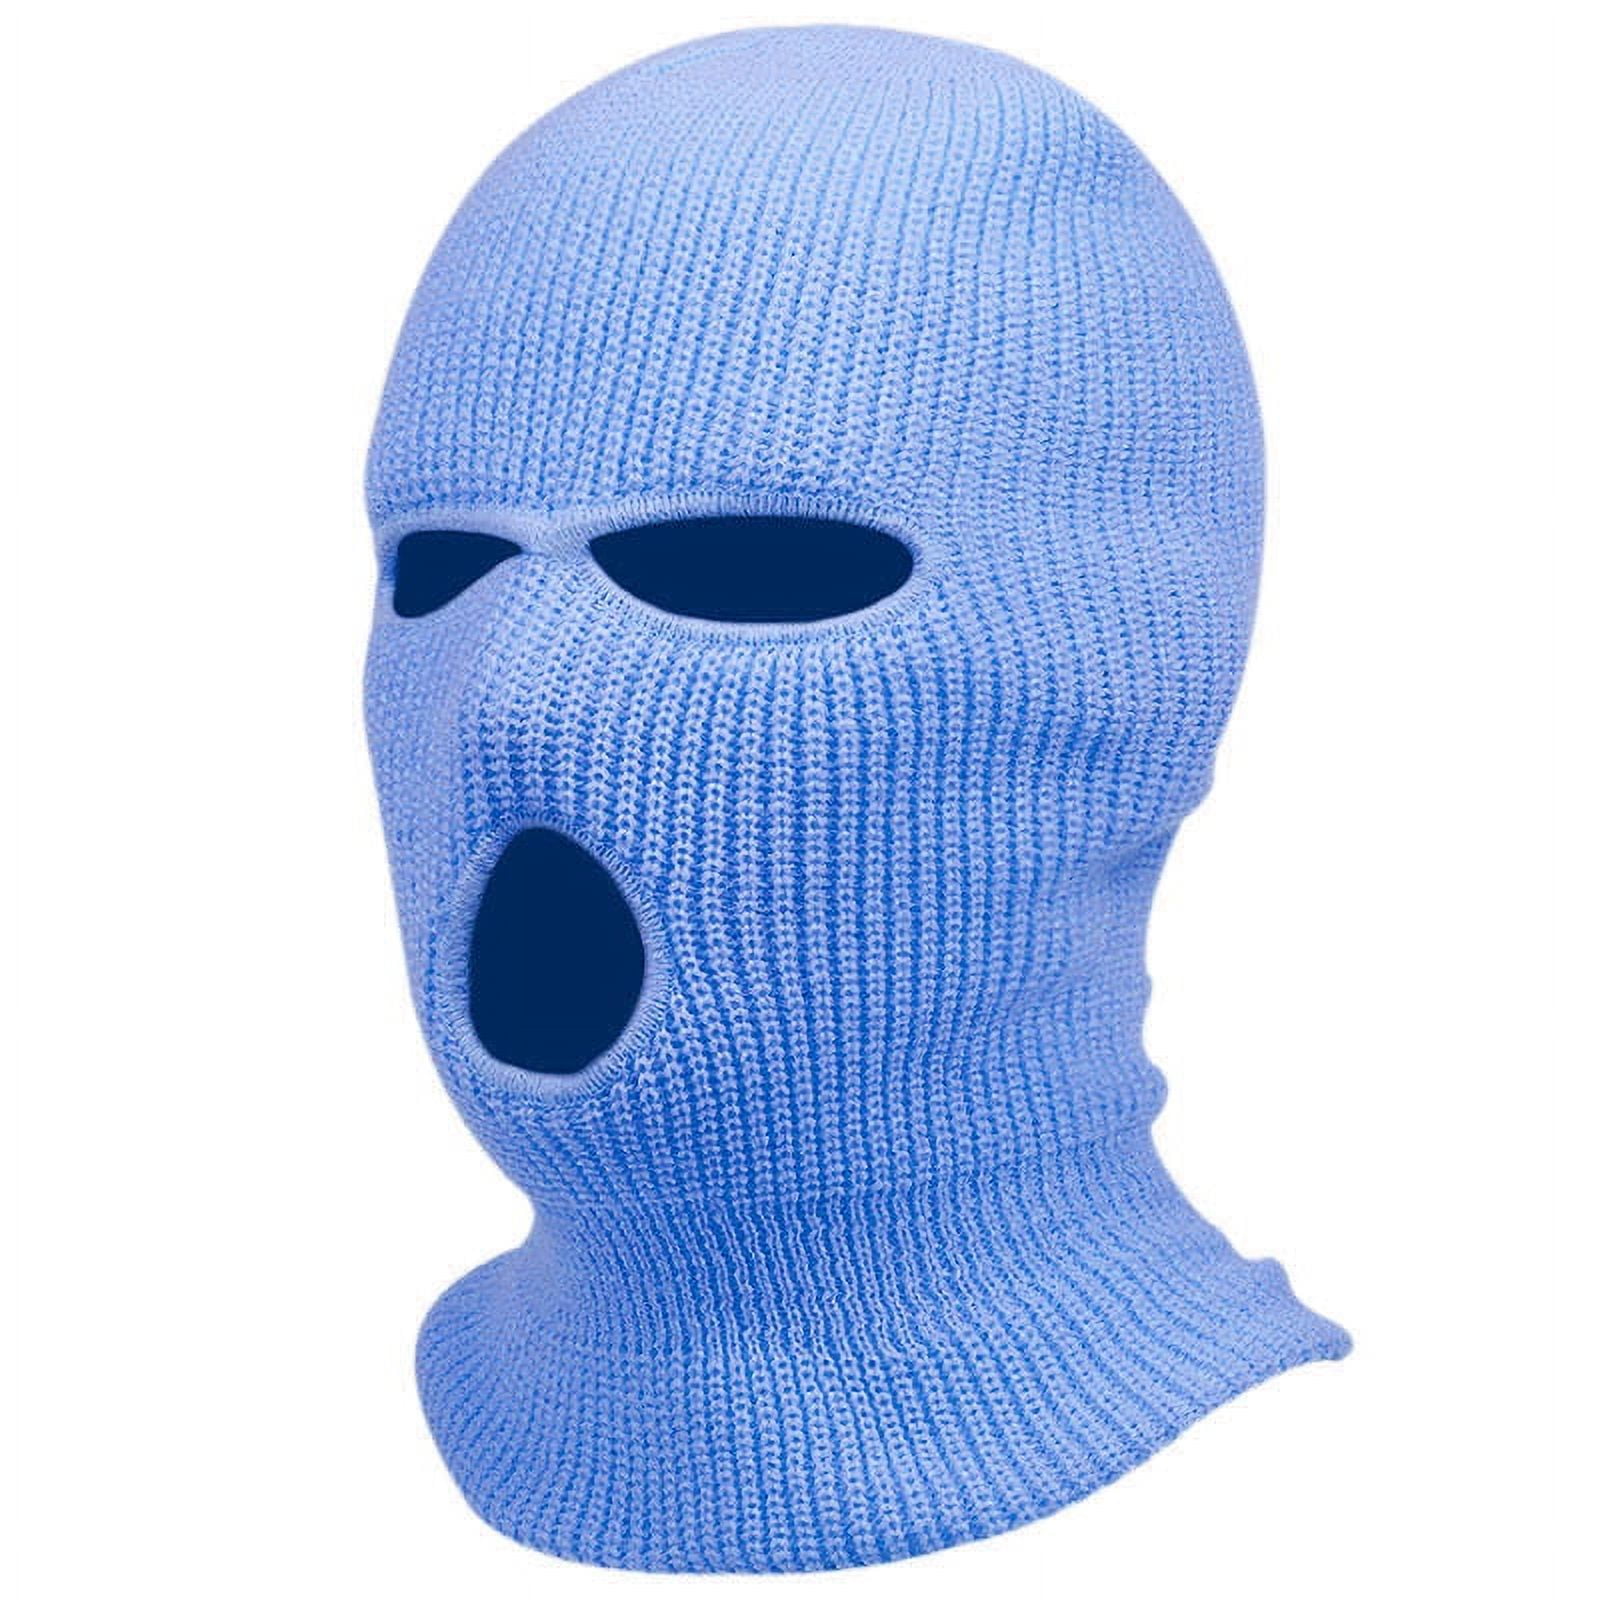 EIMELI Knit Sew Acrylic Outdoor Full Face Cover Thermal Ski Mask One ...